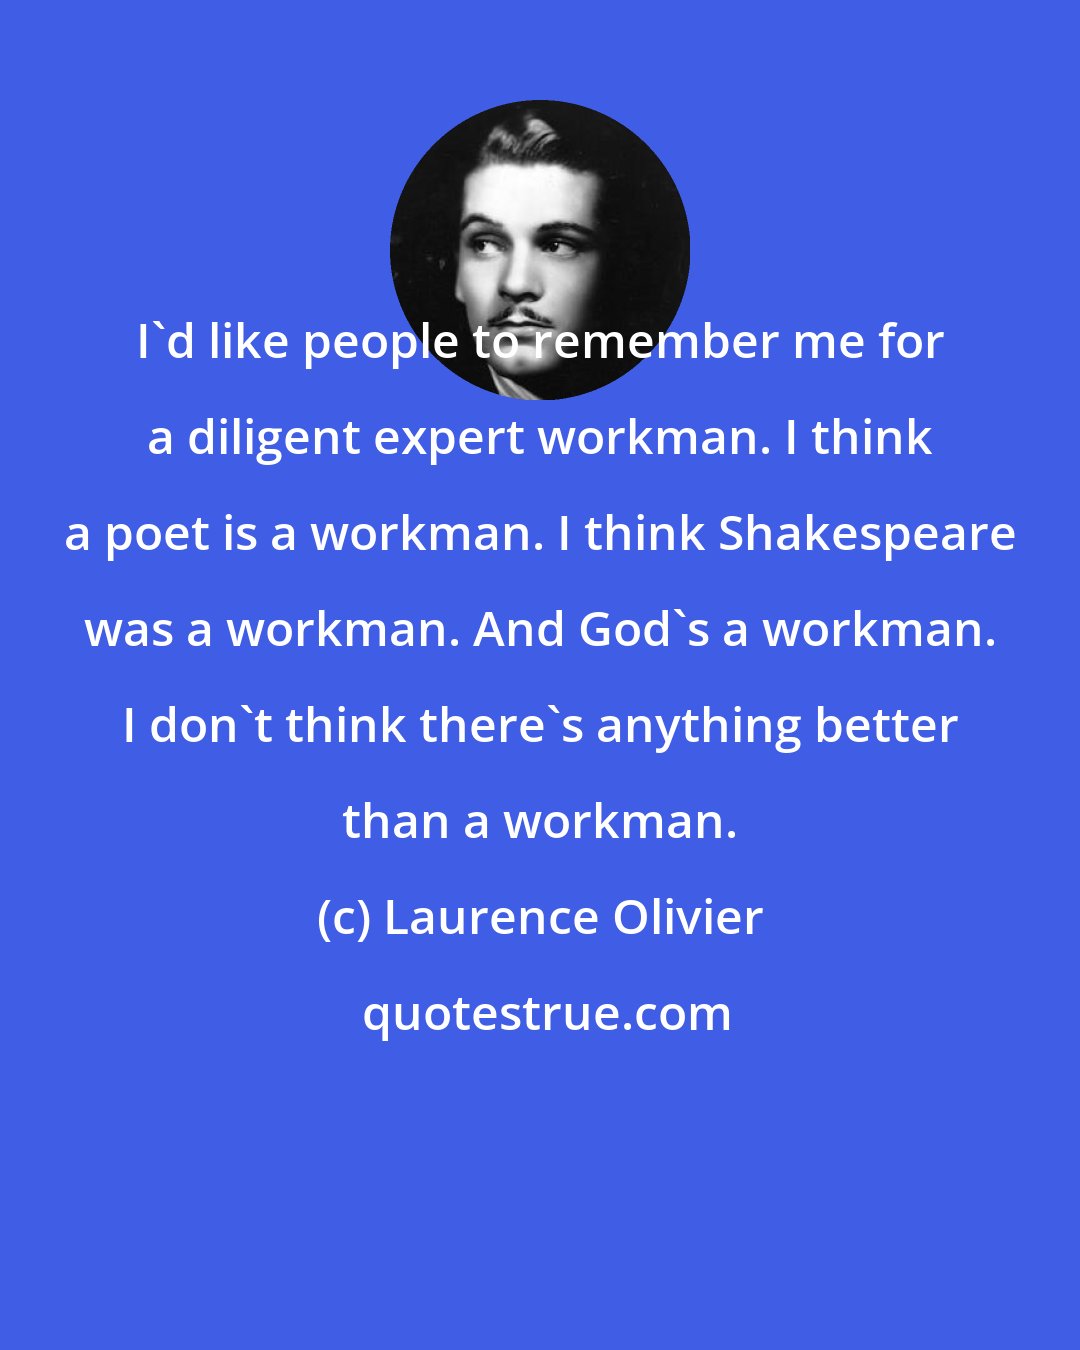 Laurence Olivier: I'd like people to remember me for a diligent expert workman. I think a poet is a workman. I think Shakespeare was a workman. And God's a workman. I don't think there's anything better than a workman.